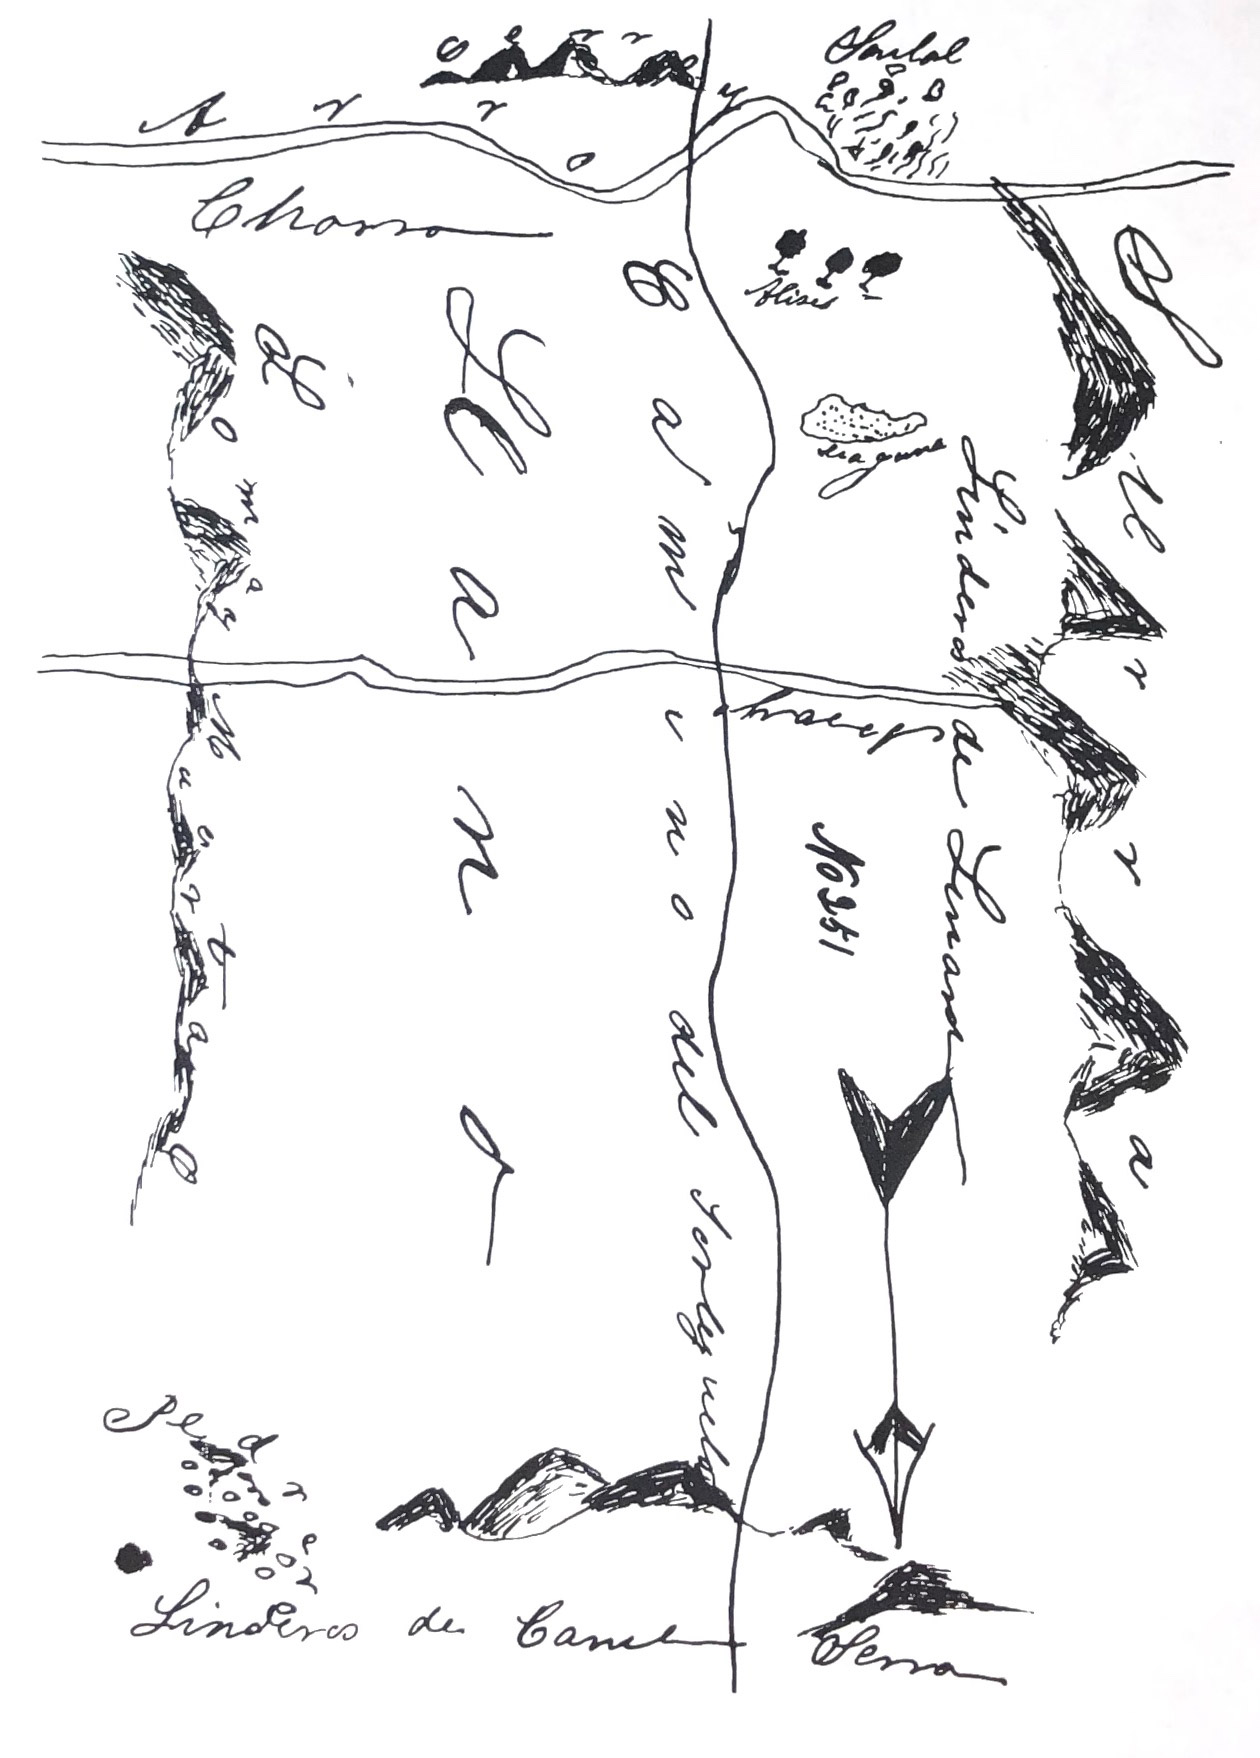 Hand-drawn map from 1841 - Guadalupe Cantua